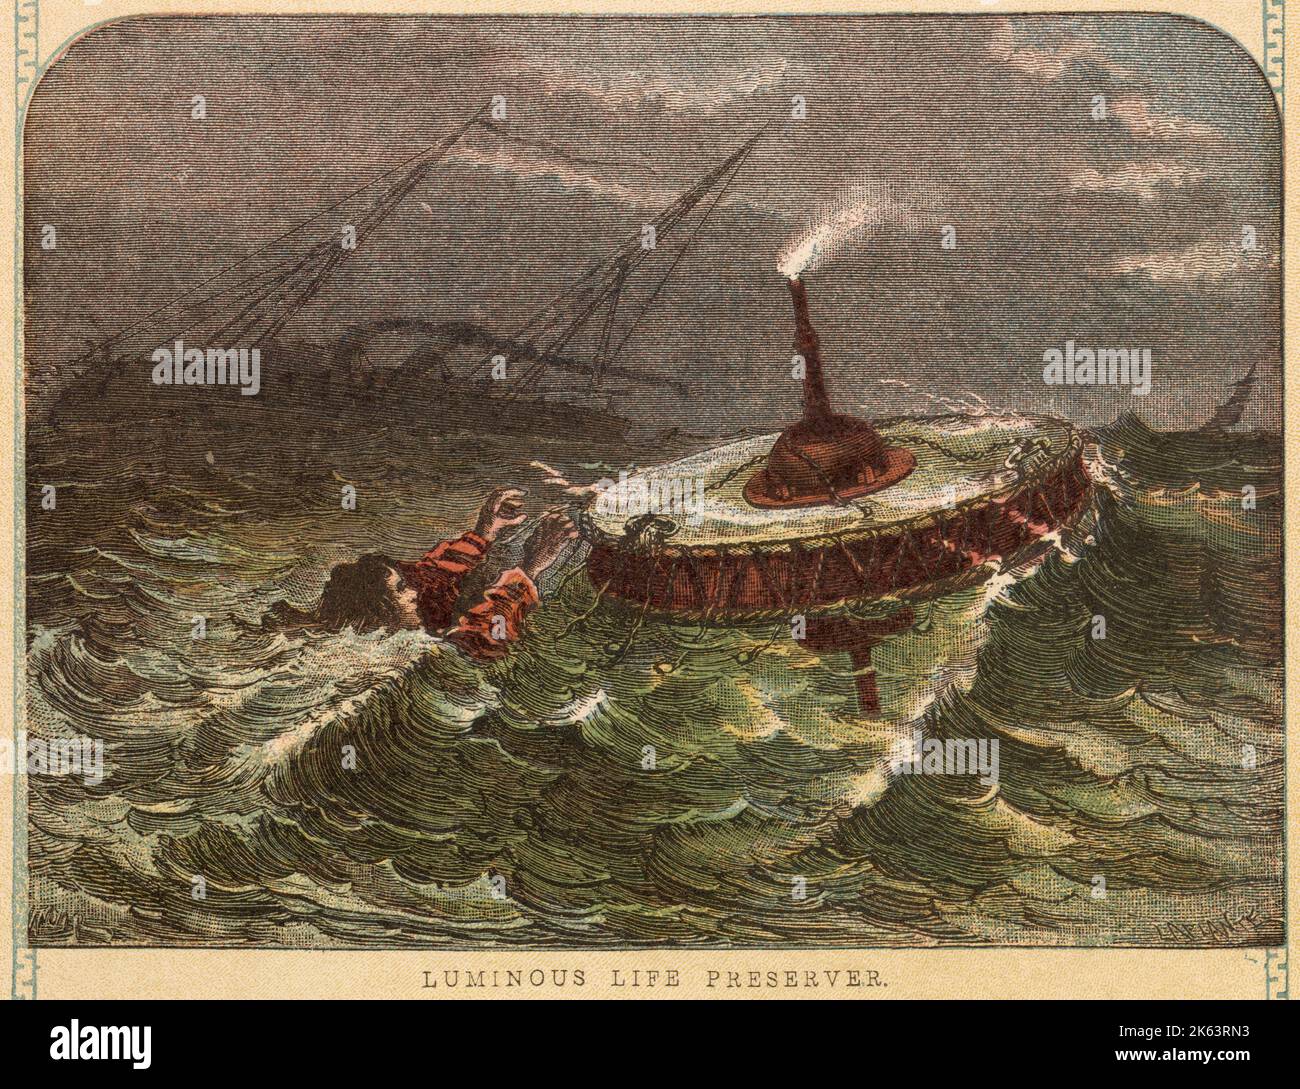 Luminous Life Preserver, to which survivors of a shipwreck may cling in hope of rescue.     Date: circa 1860 Stock Photo